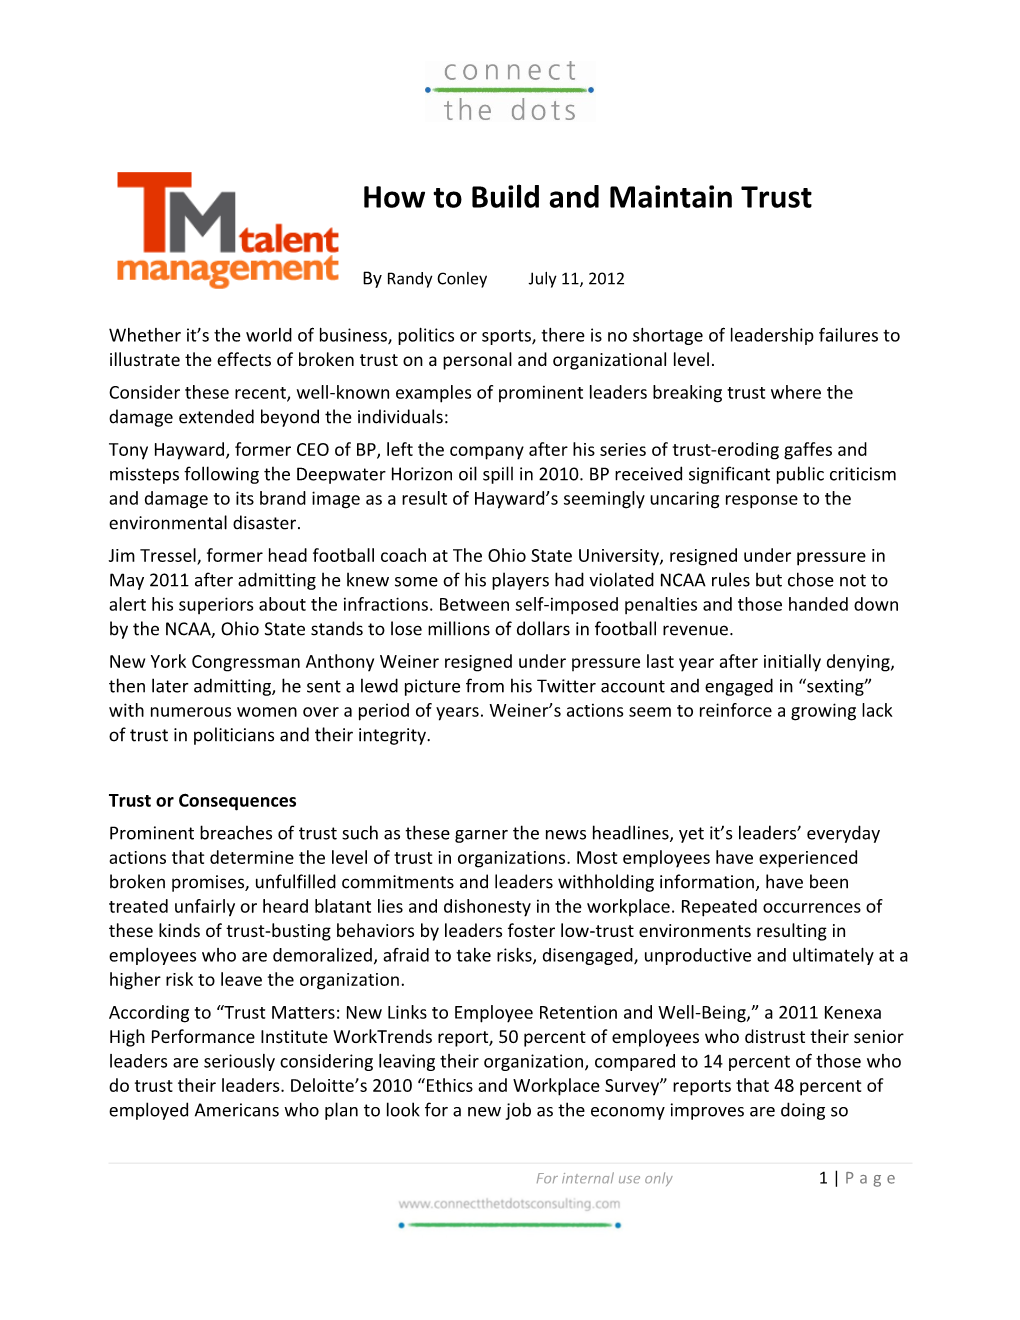 How to Build and Maintain Trust